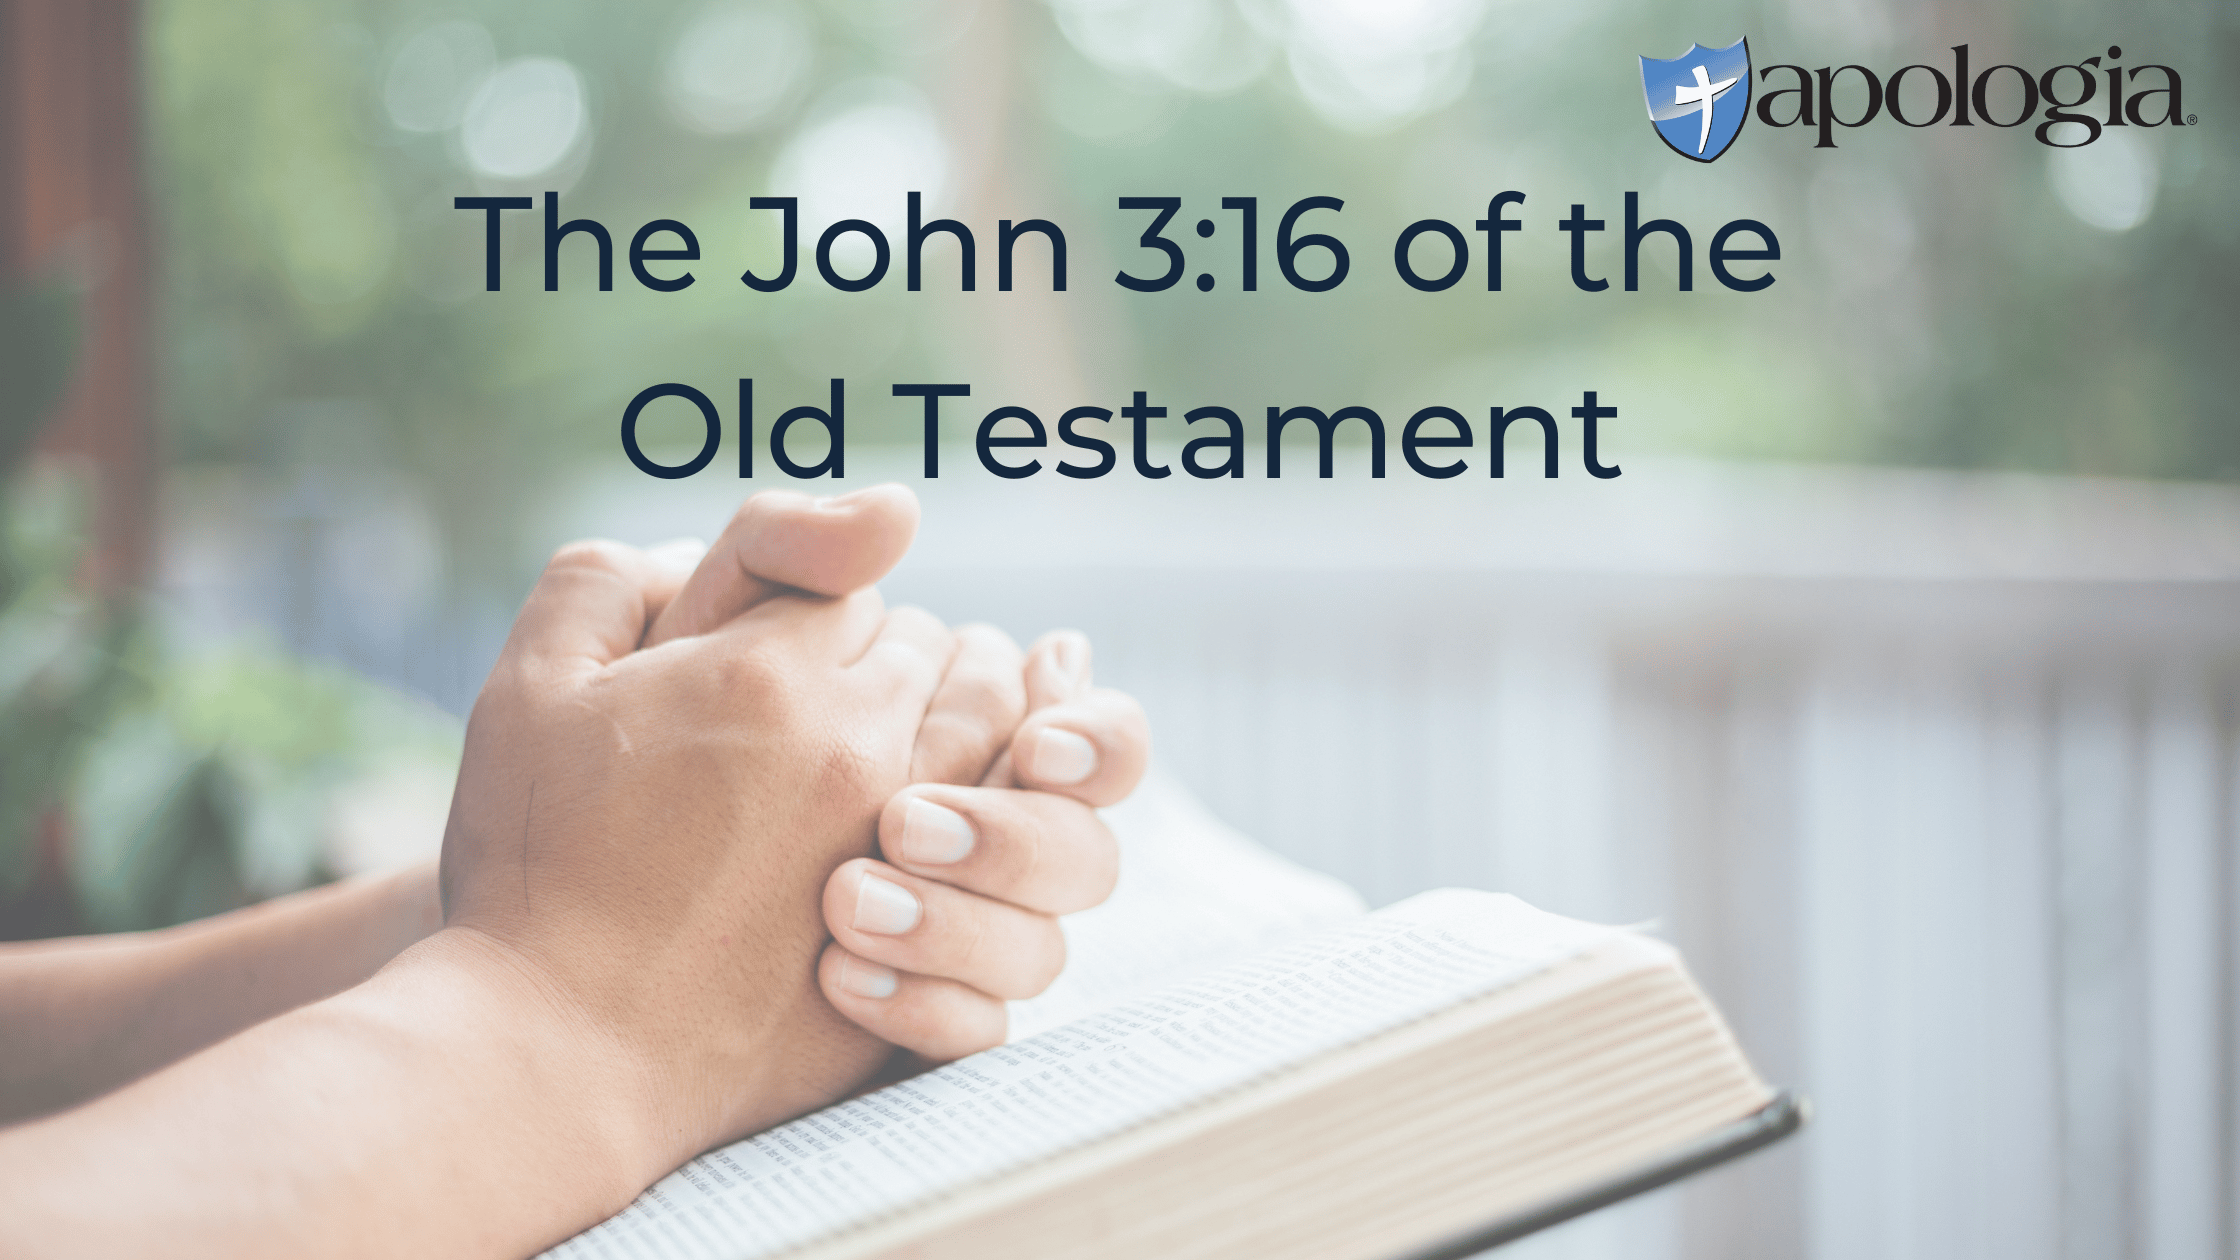 The John 316 of the Old Testament